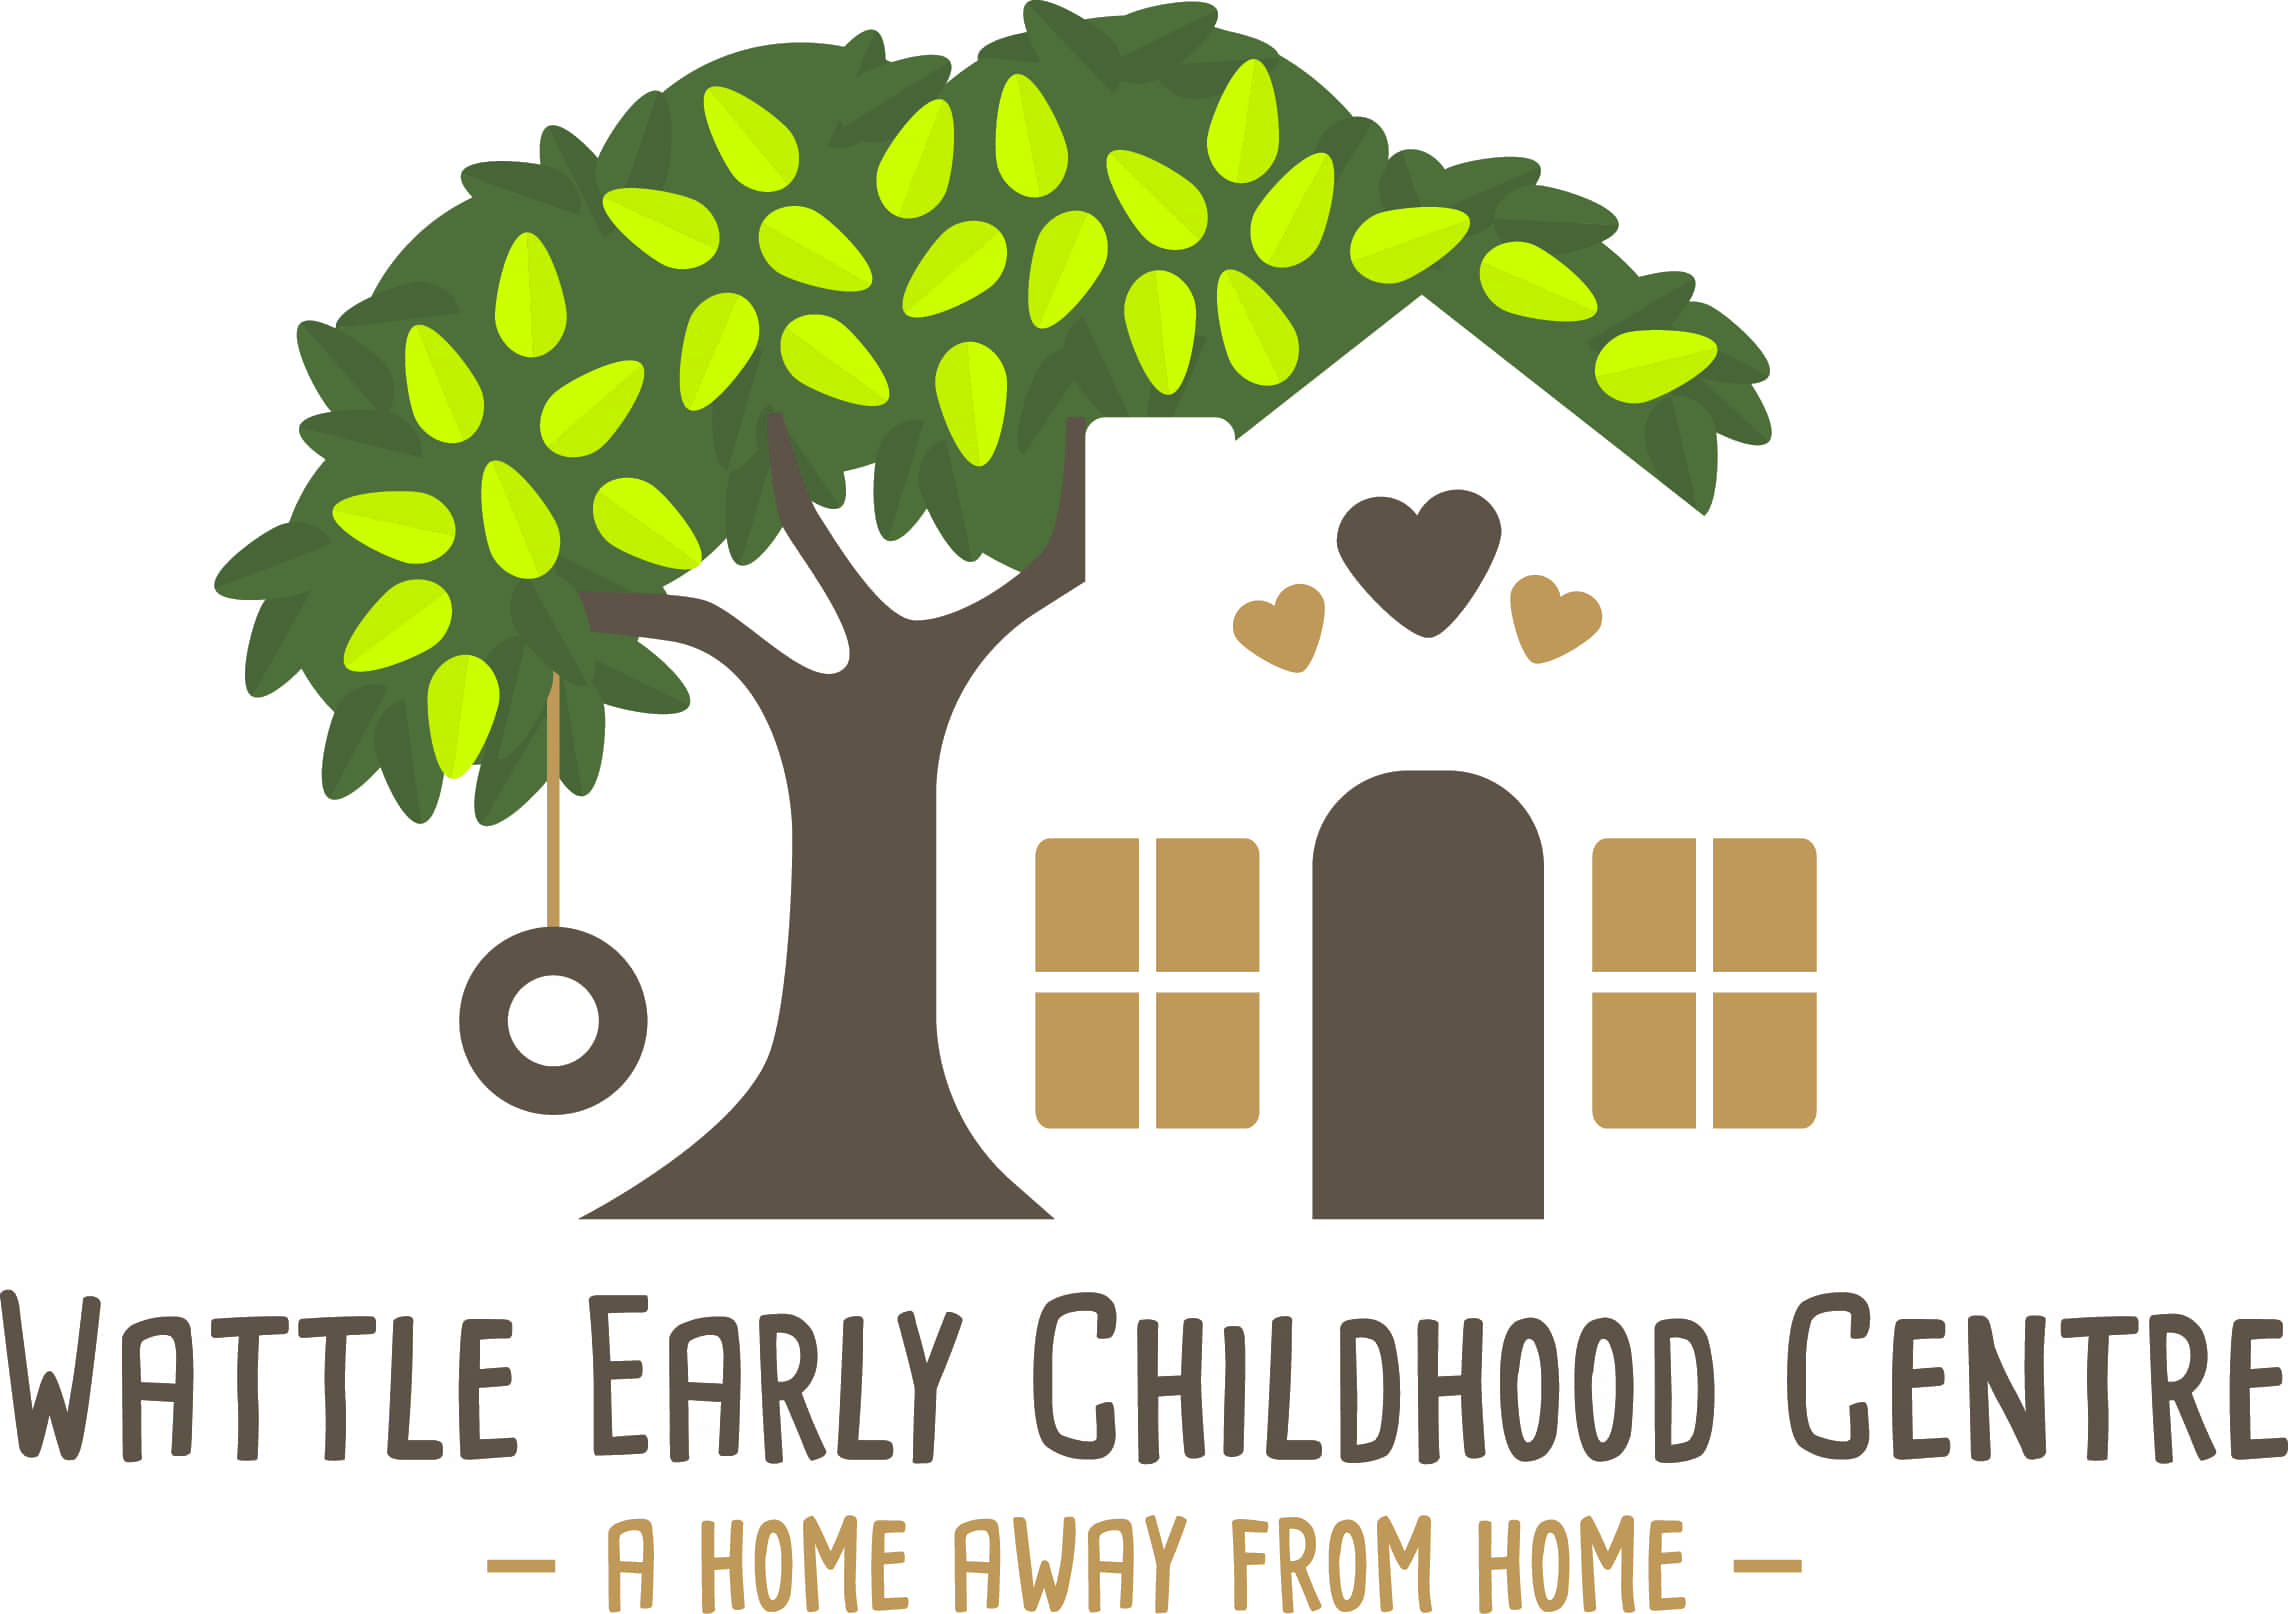 Wattle Early Childhood Centre Canberra